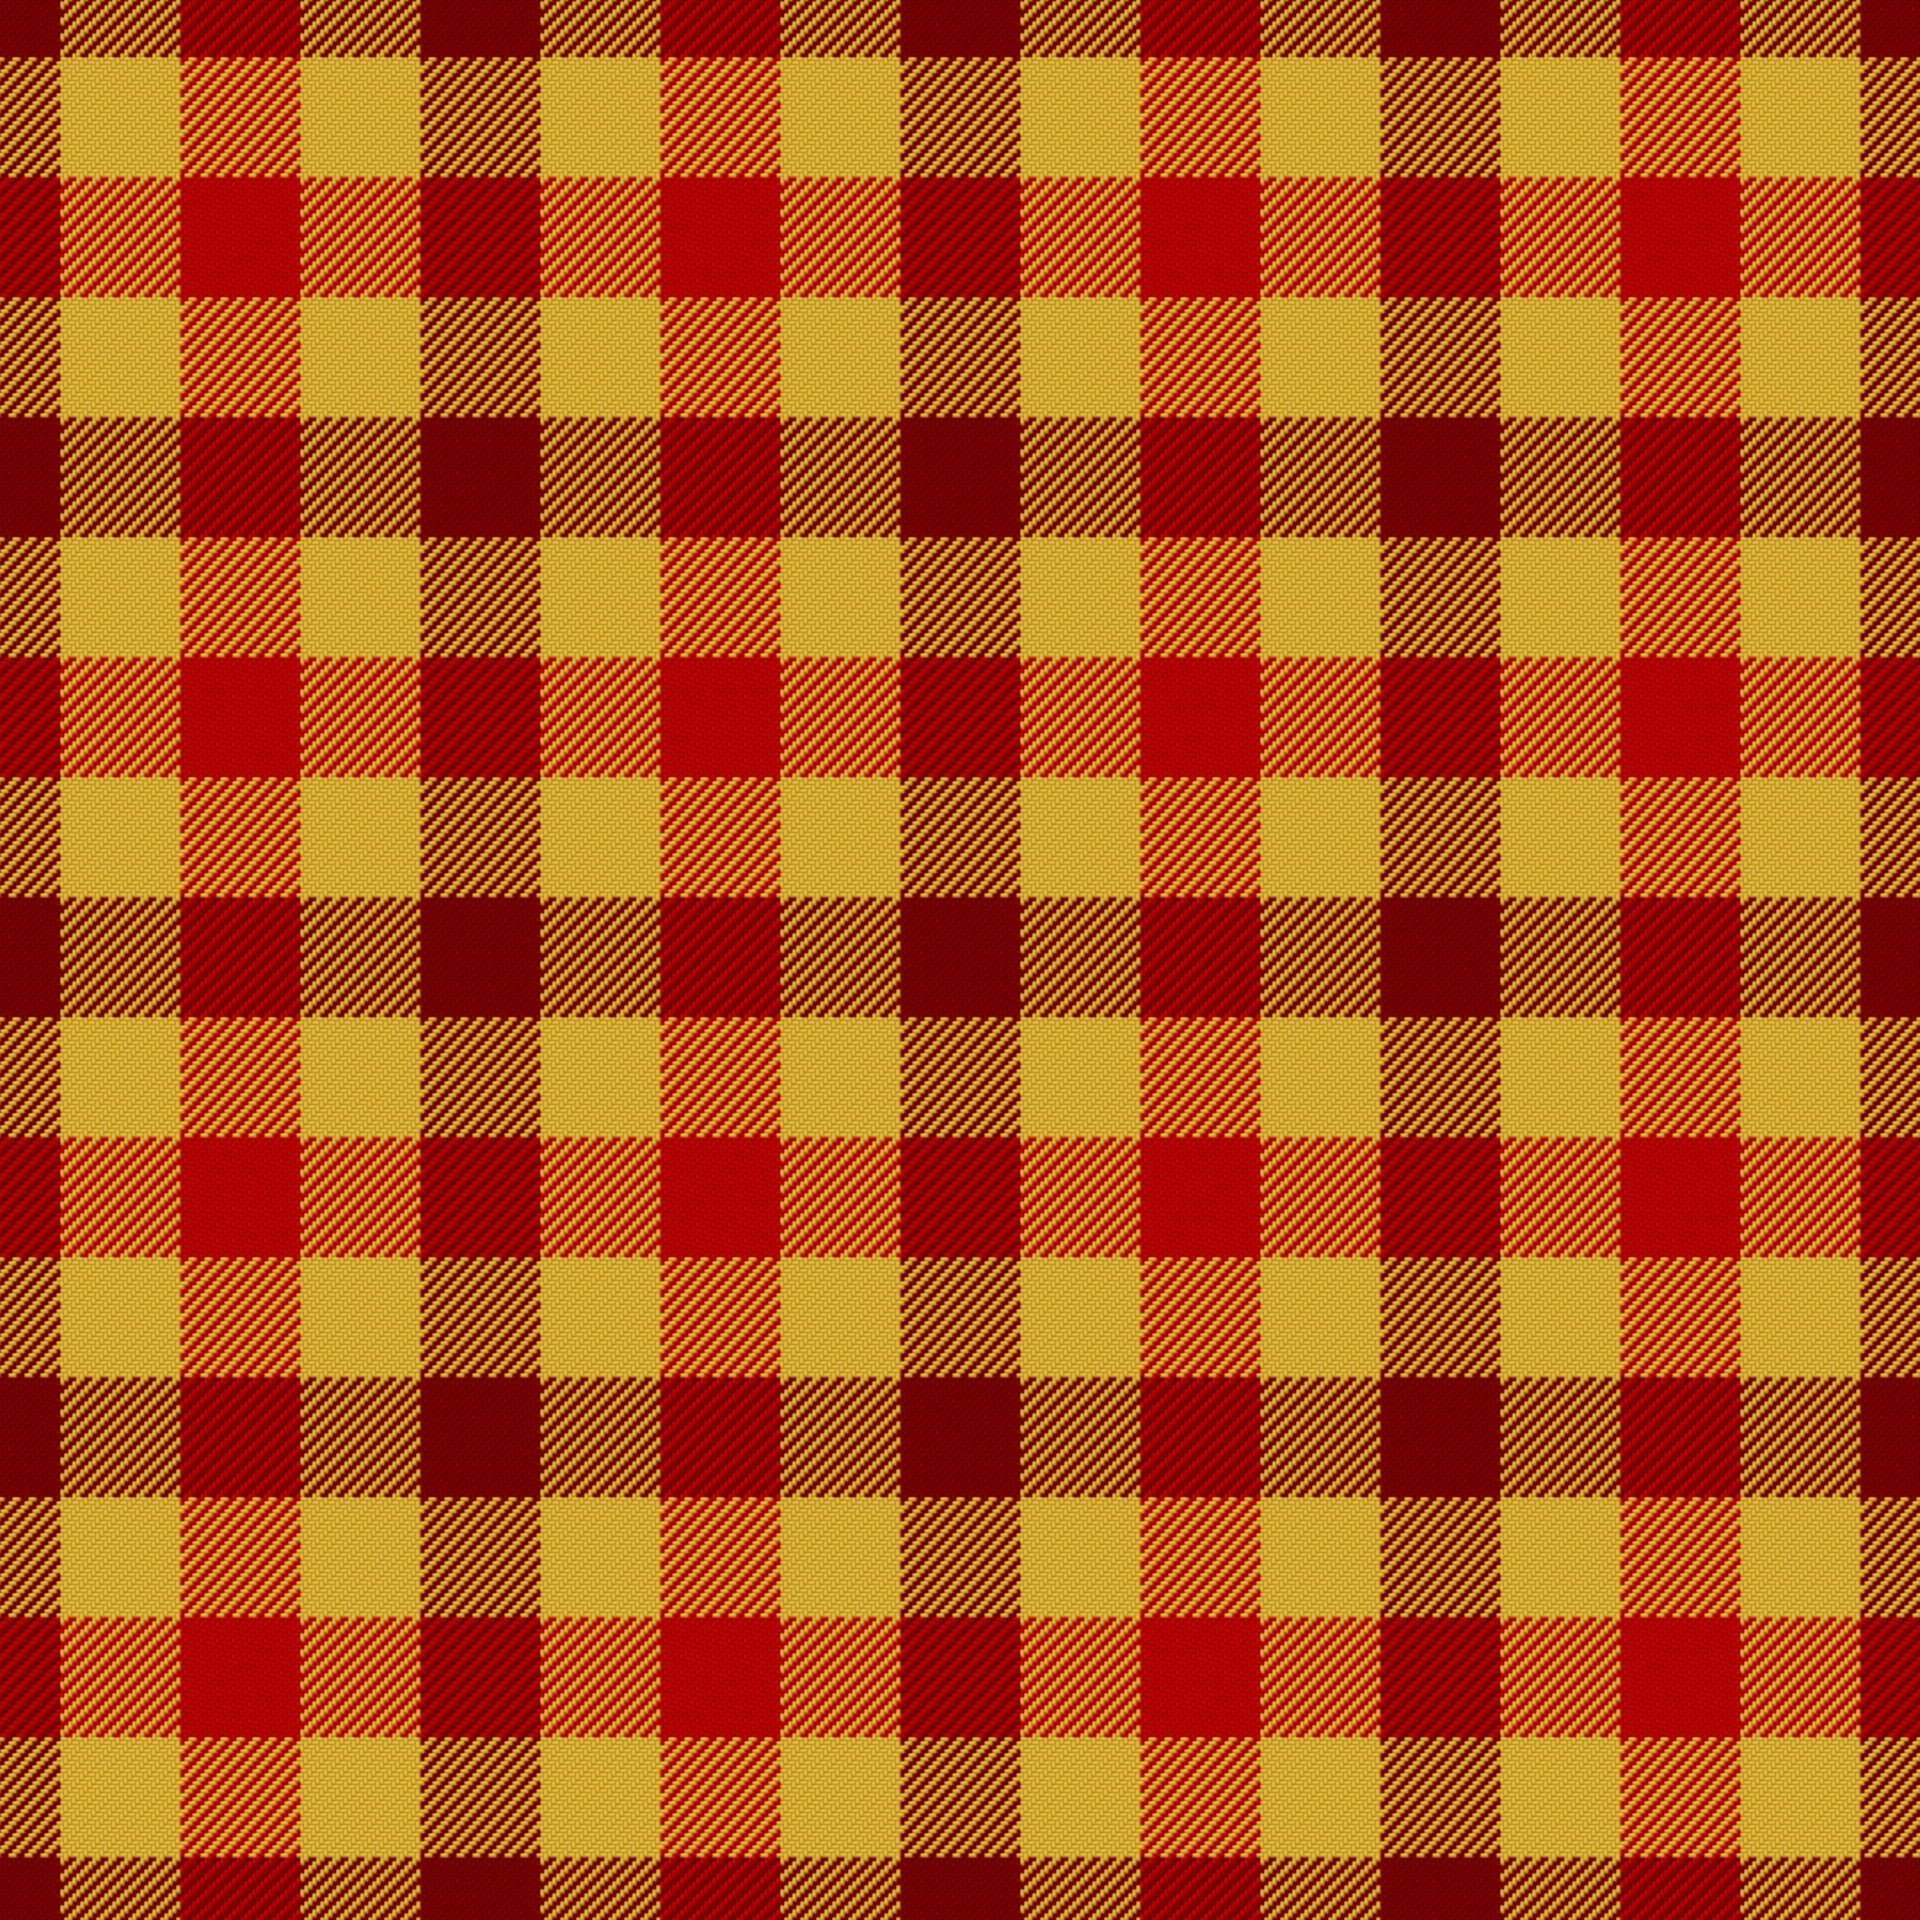 Plaid Checks Background in red and yellow colors with imitation of weaving texture for your scrapbooking or some other project